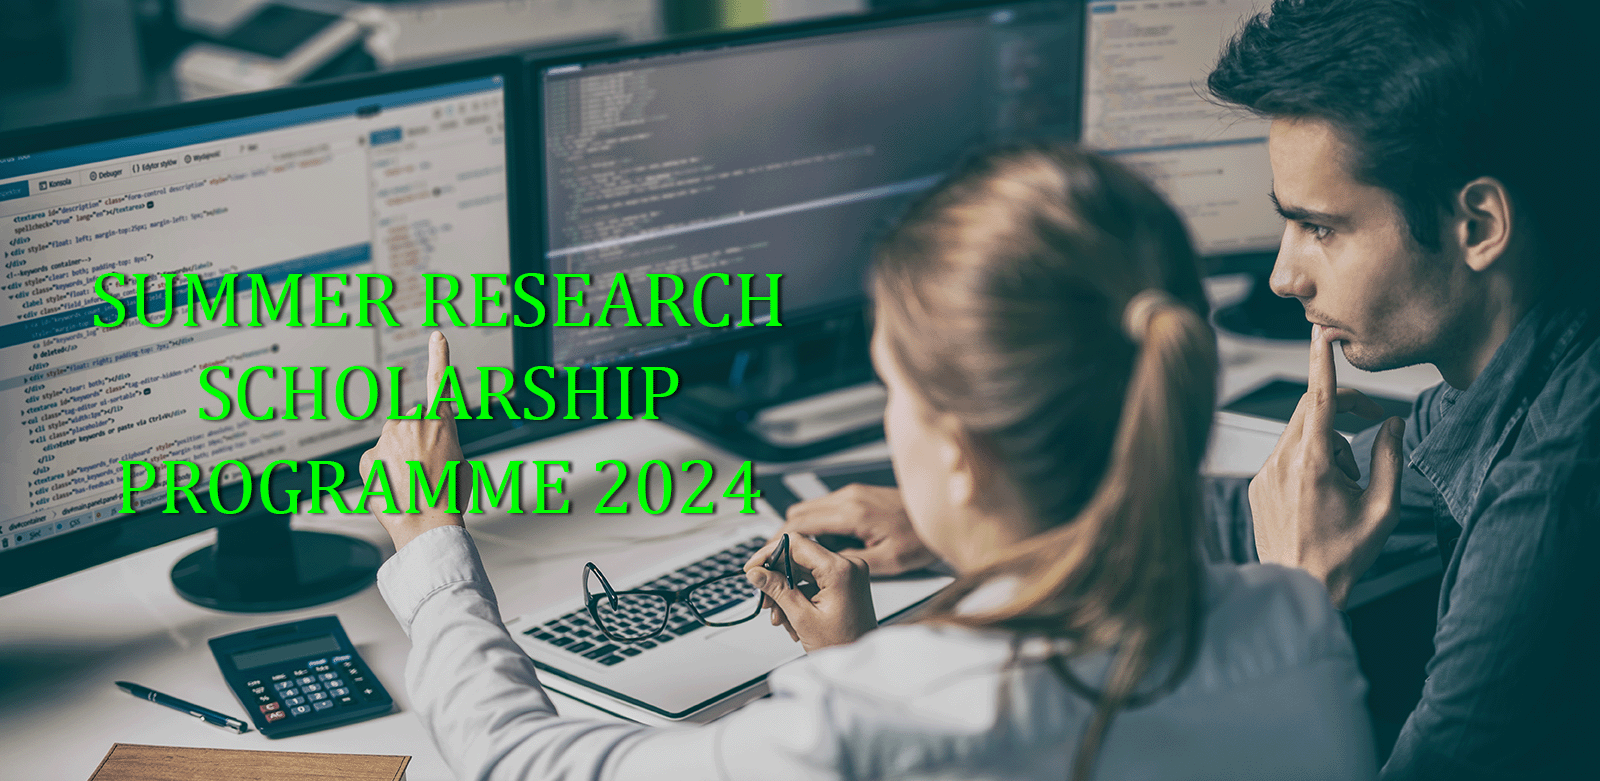 Pursue a 5 week summer research project in the School of Computer Science